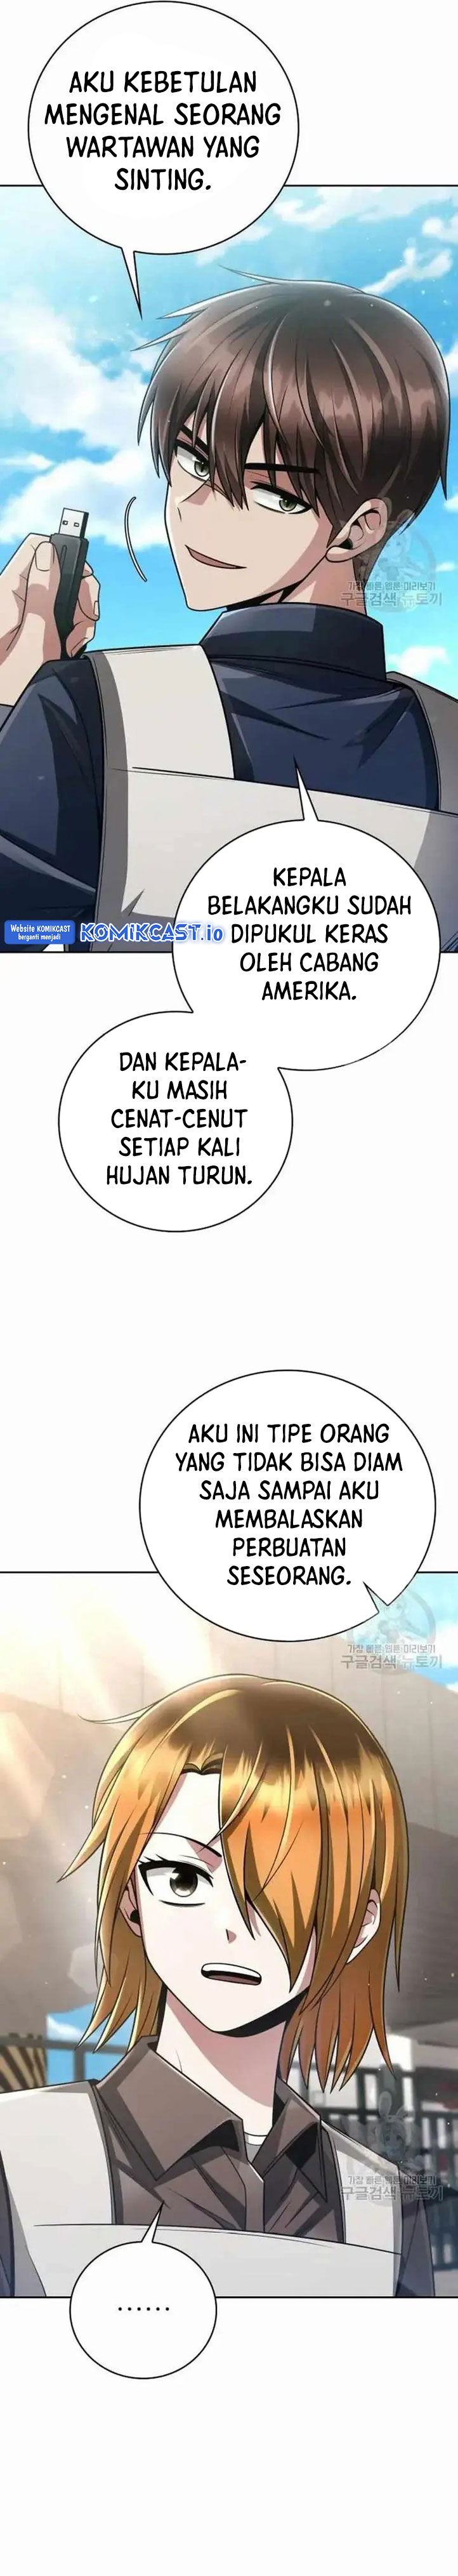 Dilarang COPAS - situs resmi www.mangacanblog.com - Komik clever cleaning life of the returned genius hunter 037 - chapter 37 38 Indonesia clever cleaning life of the returned genius hunter 037 - chapter 37 Terbaru 30|Baca Manga Komik Indonesia|Mangacan